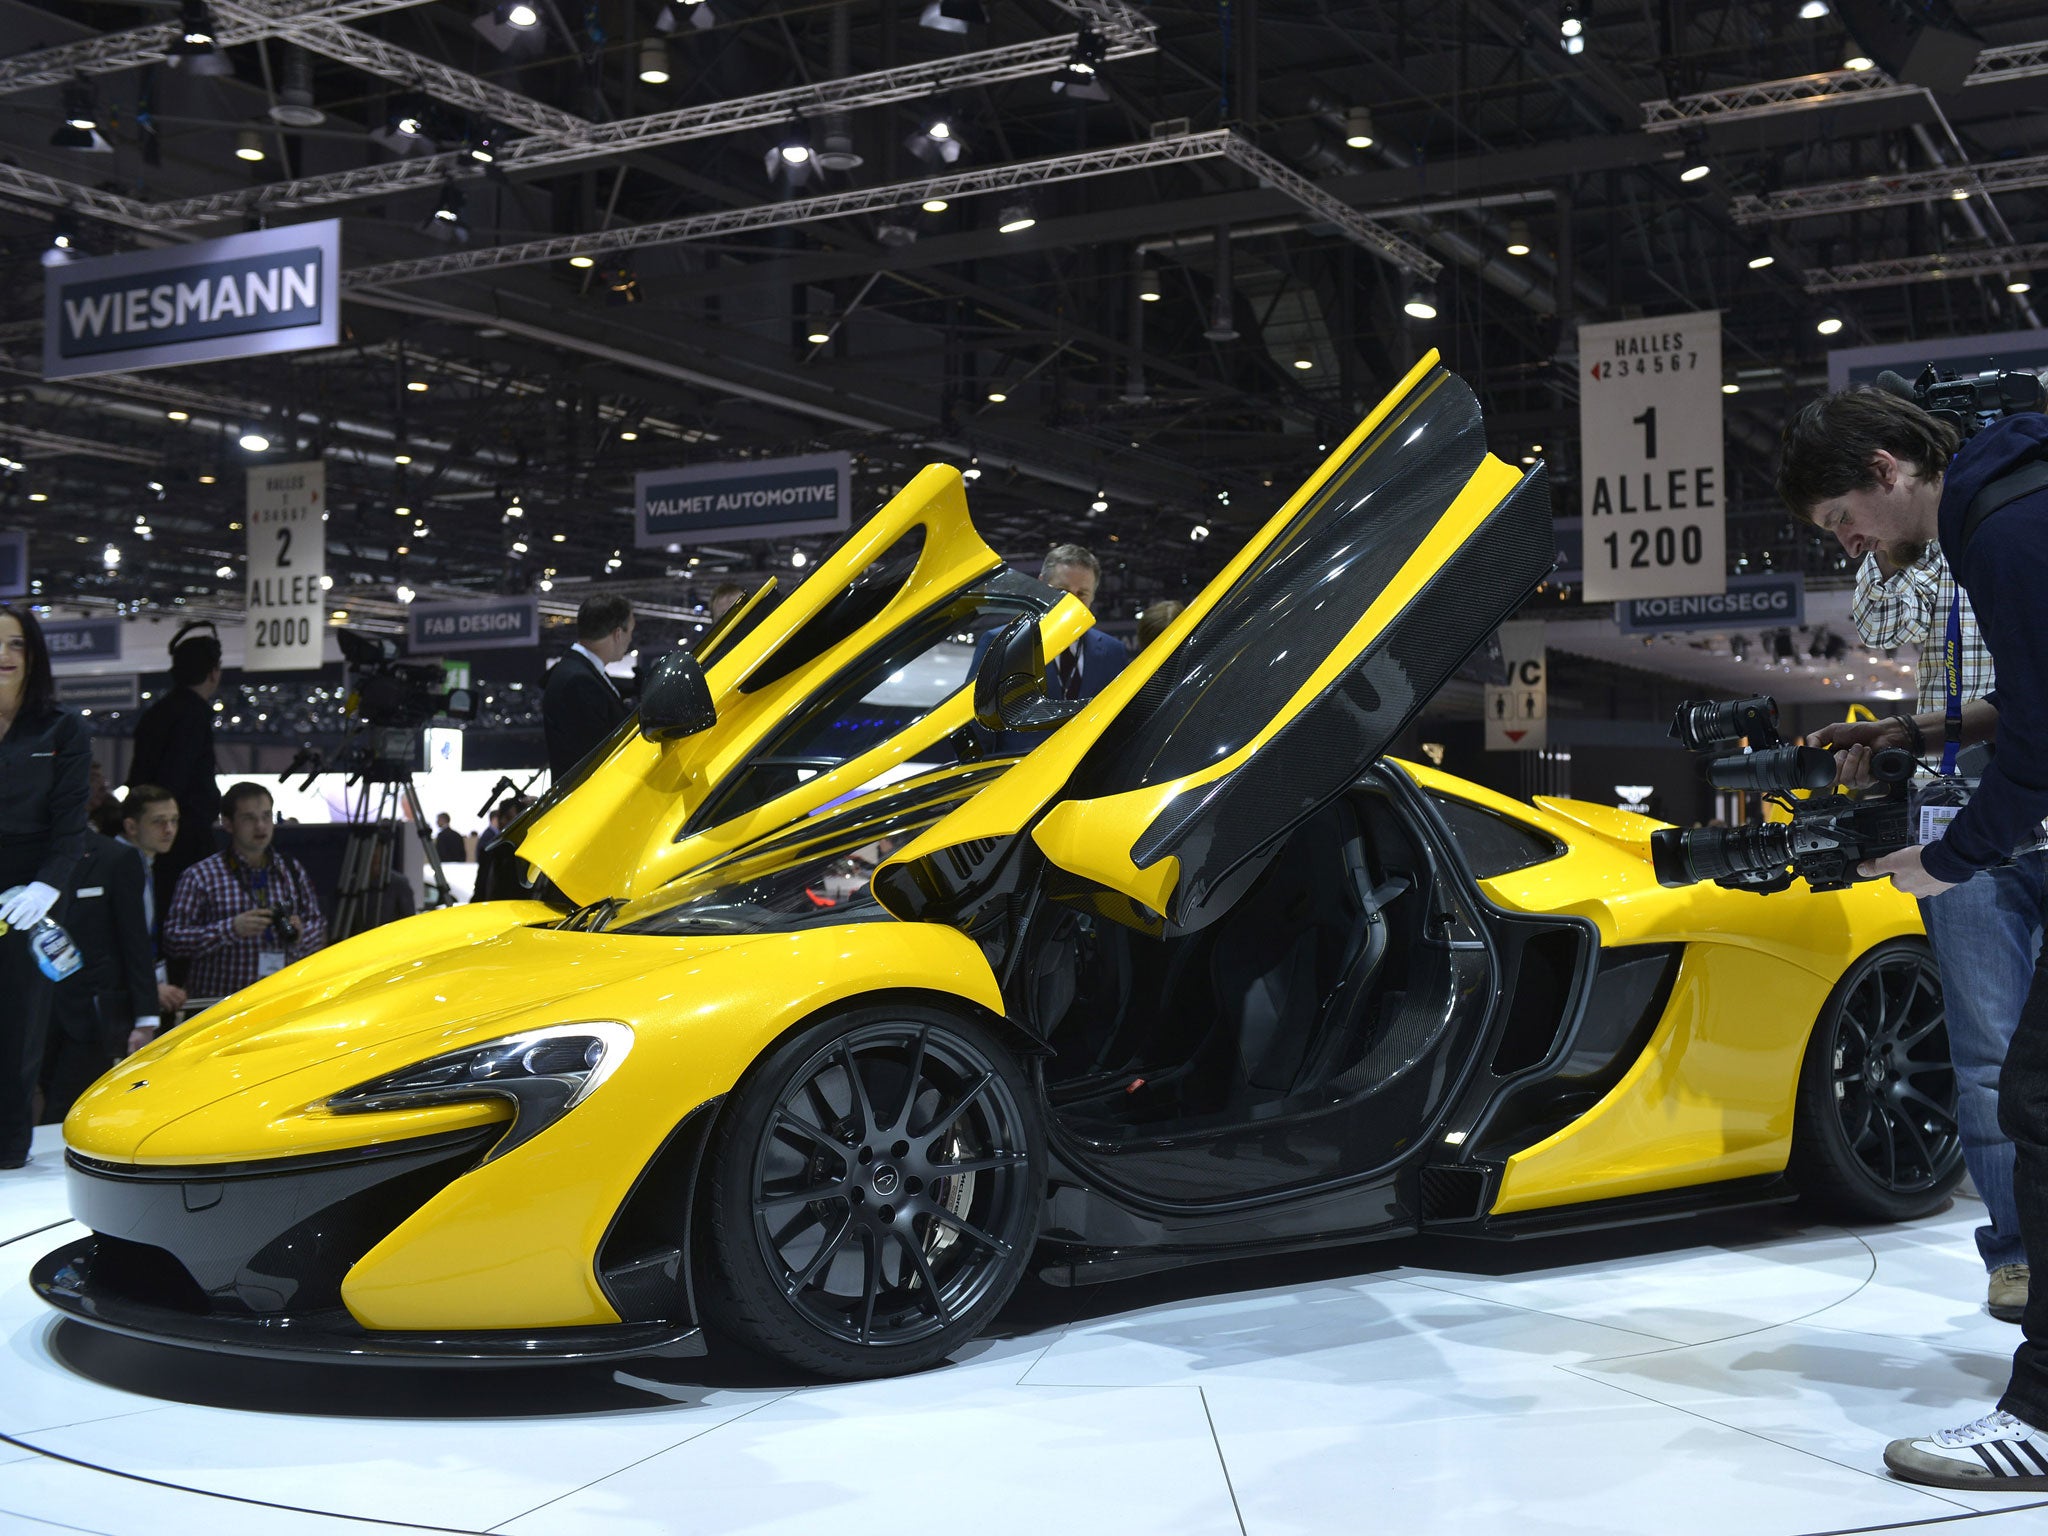 McLaren aims to produce 4,000 p1 GTRs annually by 2016; it will enter production this year